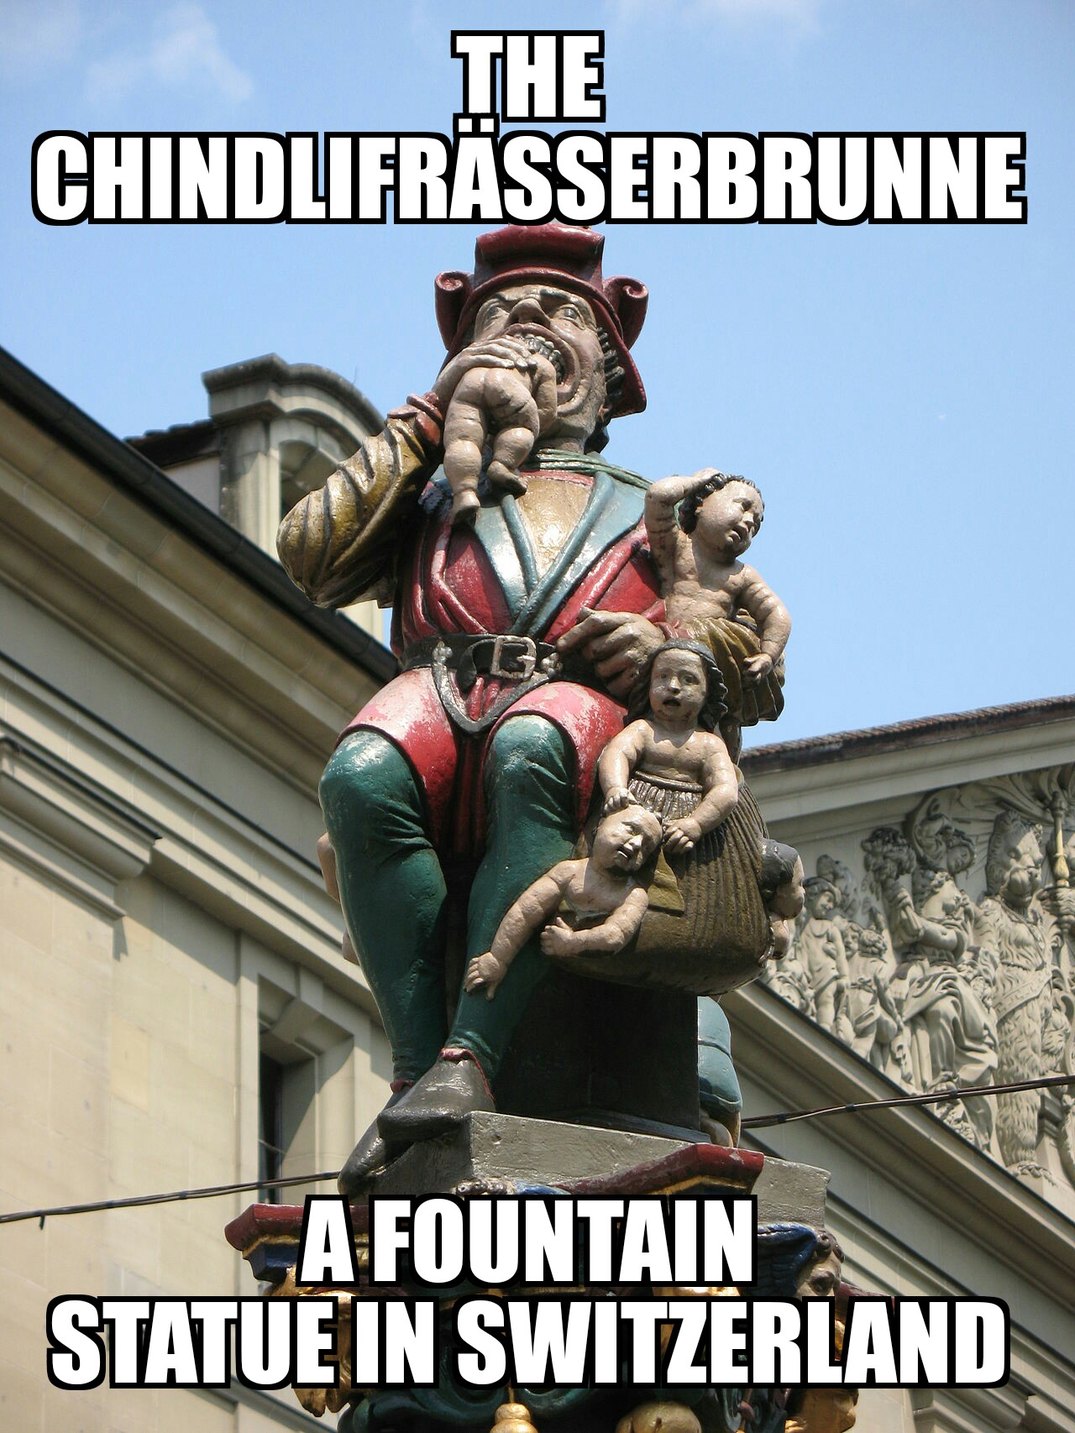 This statue is called Chindlifrässer (child eater) and is located in bern switzerland - meme